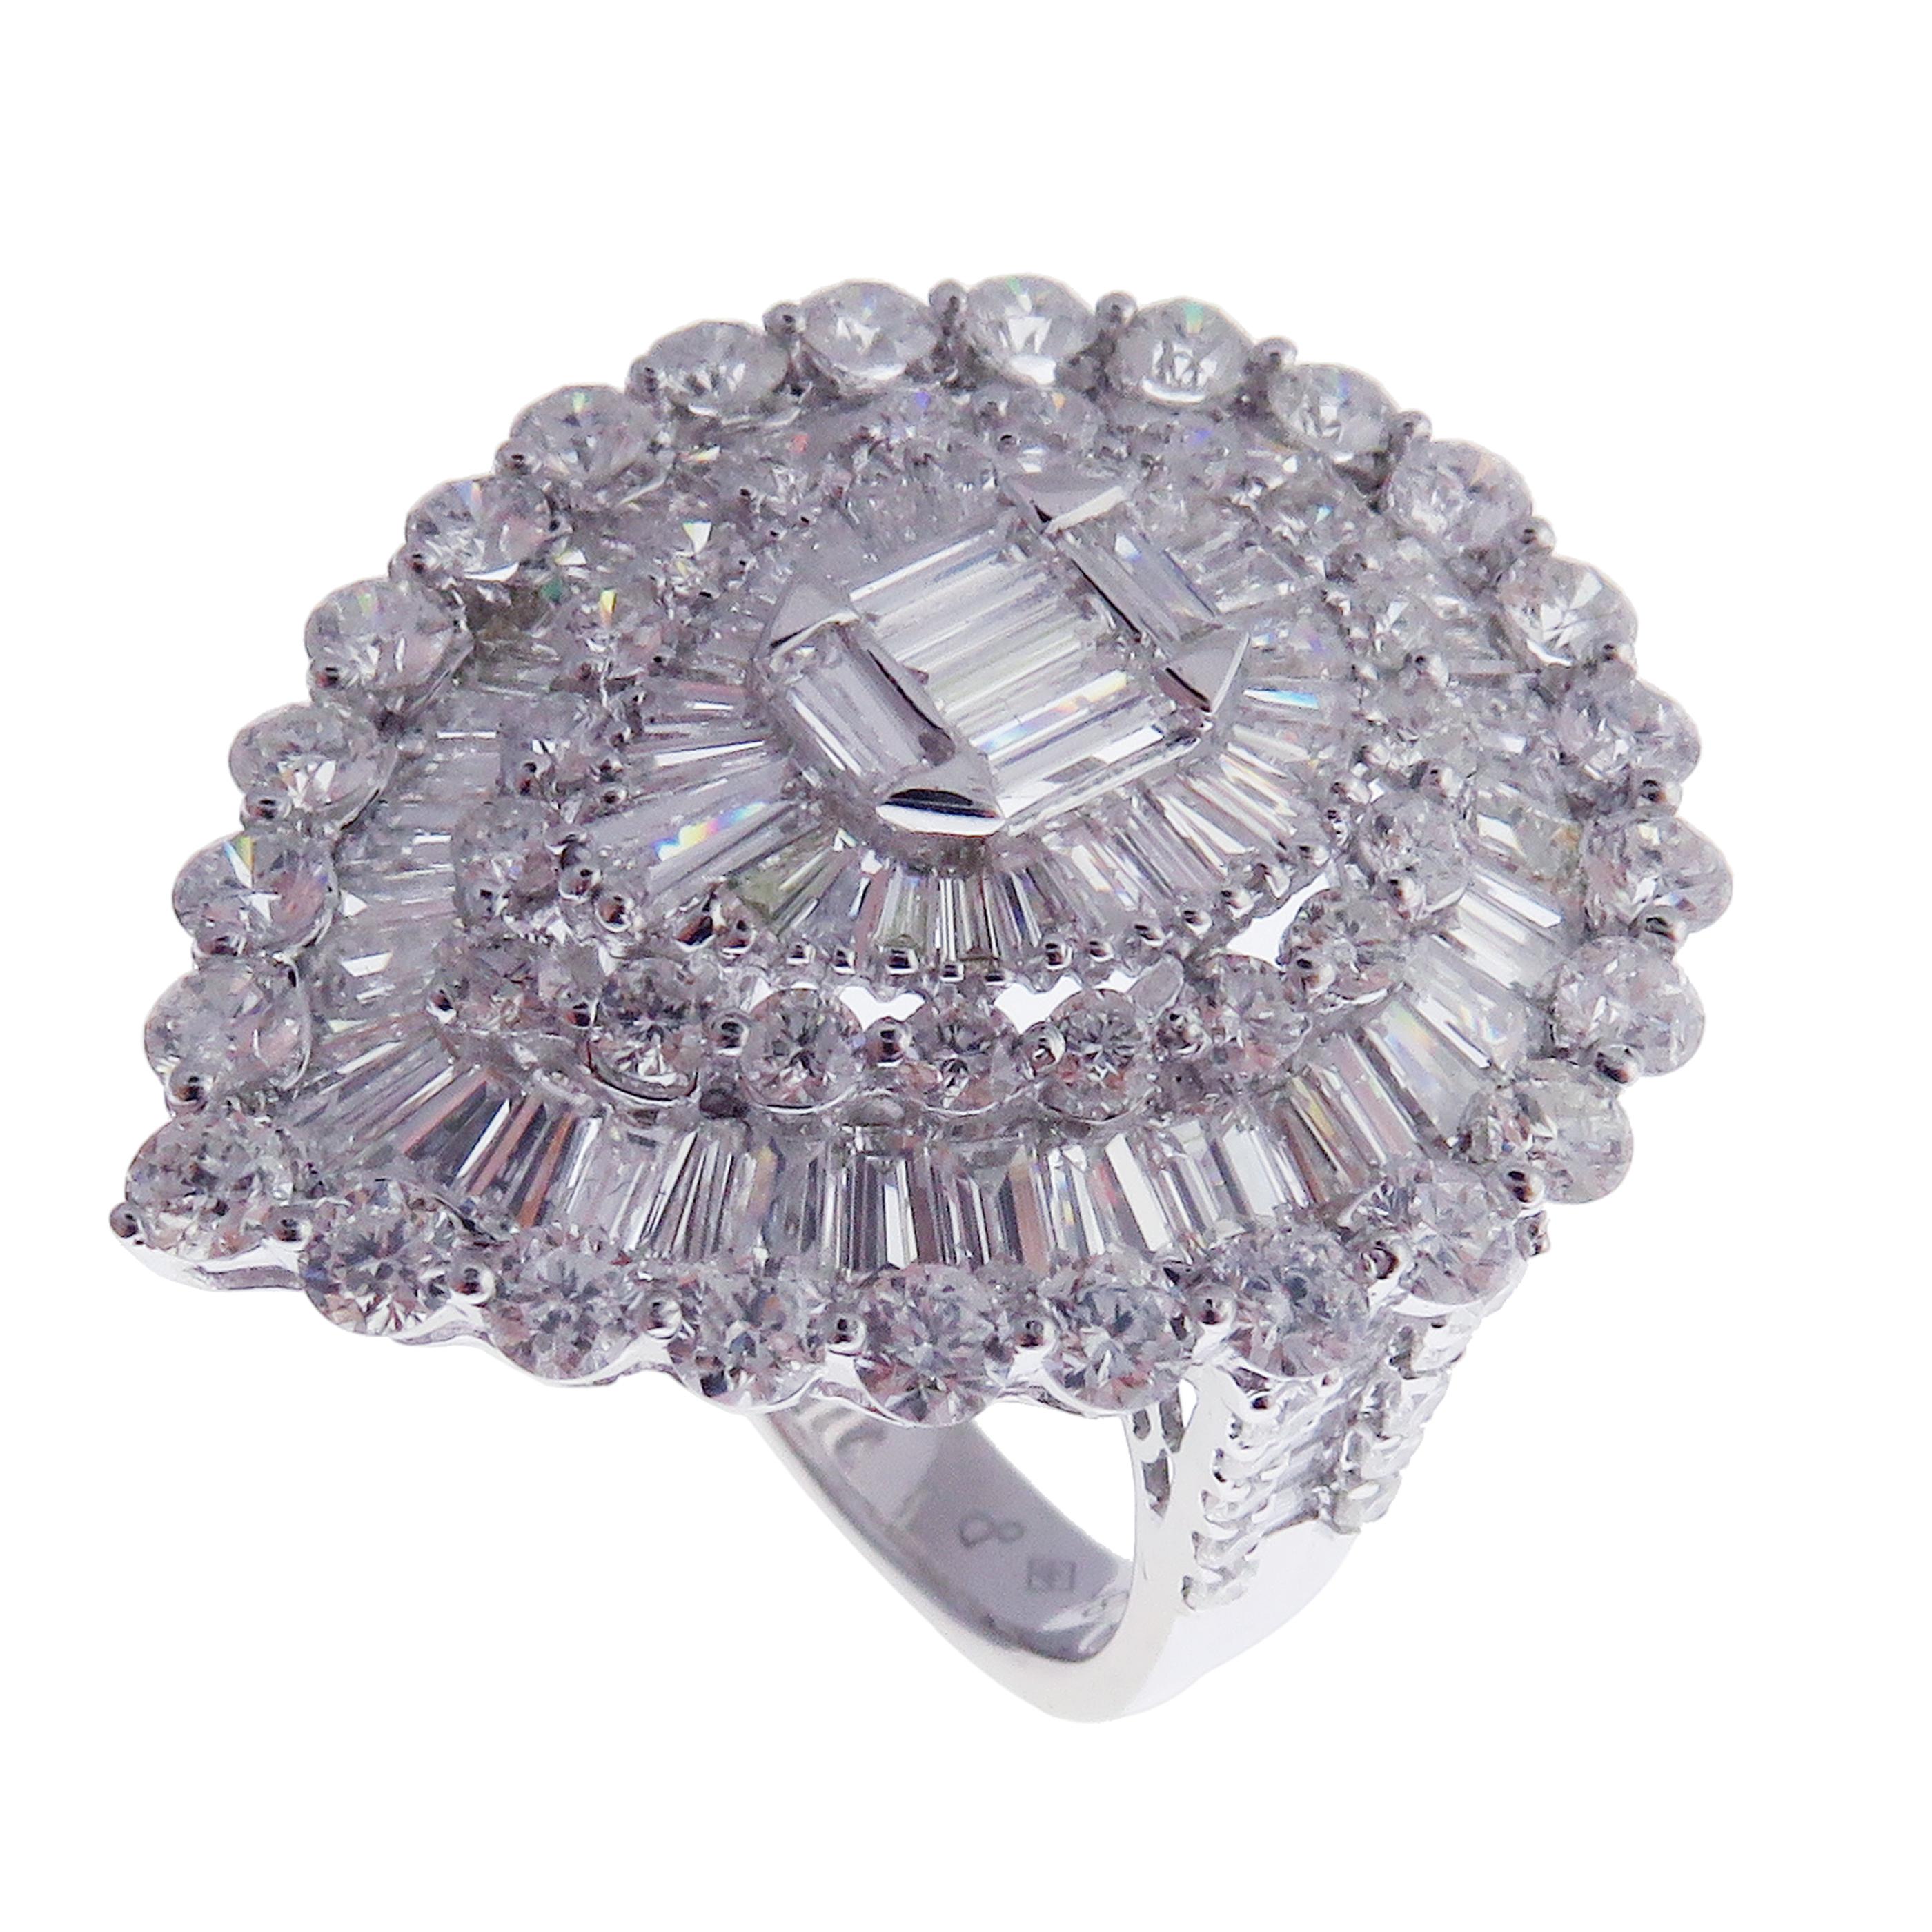 This baguette pear diamond ring is crafted in 18-karat white gold, weighing approximately 5.42 total carats of SI-V Quality white diamonds. Diamond embellishments on ring shank and a modern design brings out the beauty of the ring. This ring is